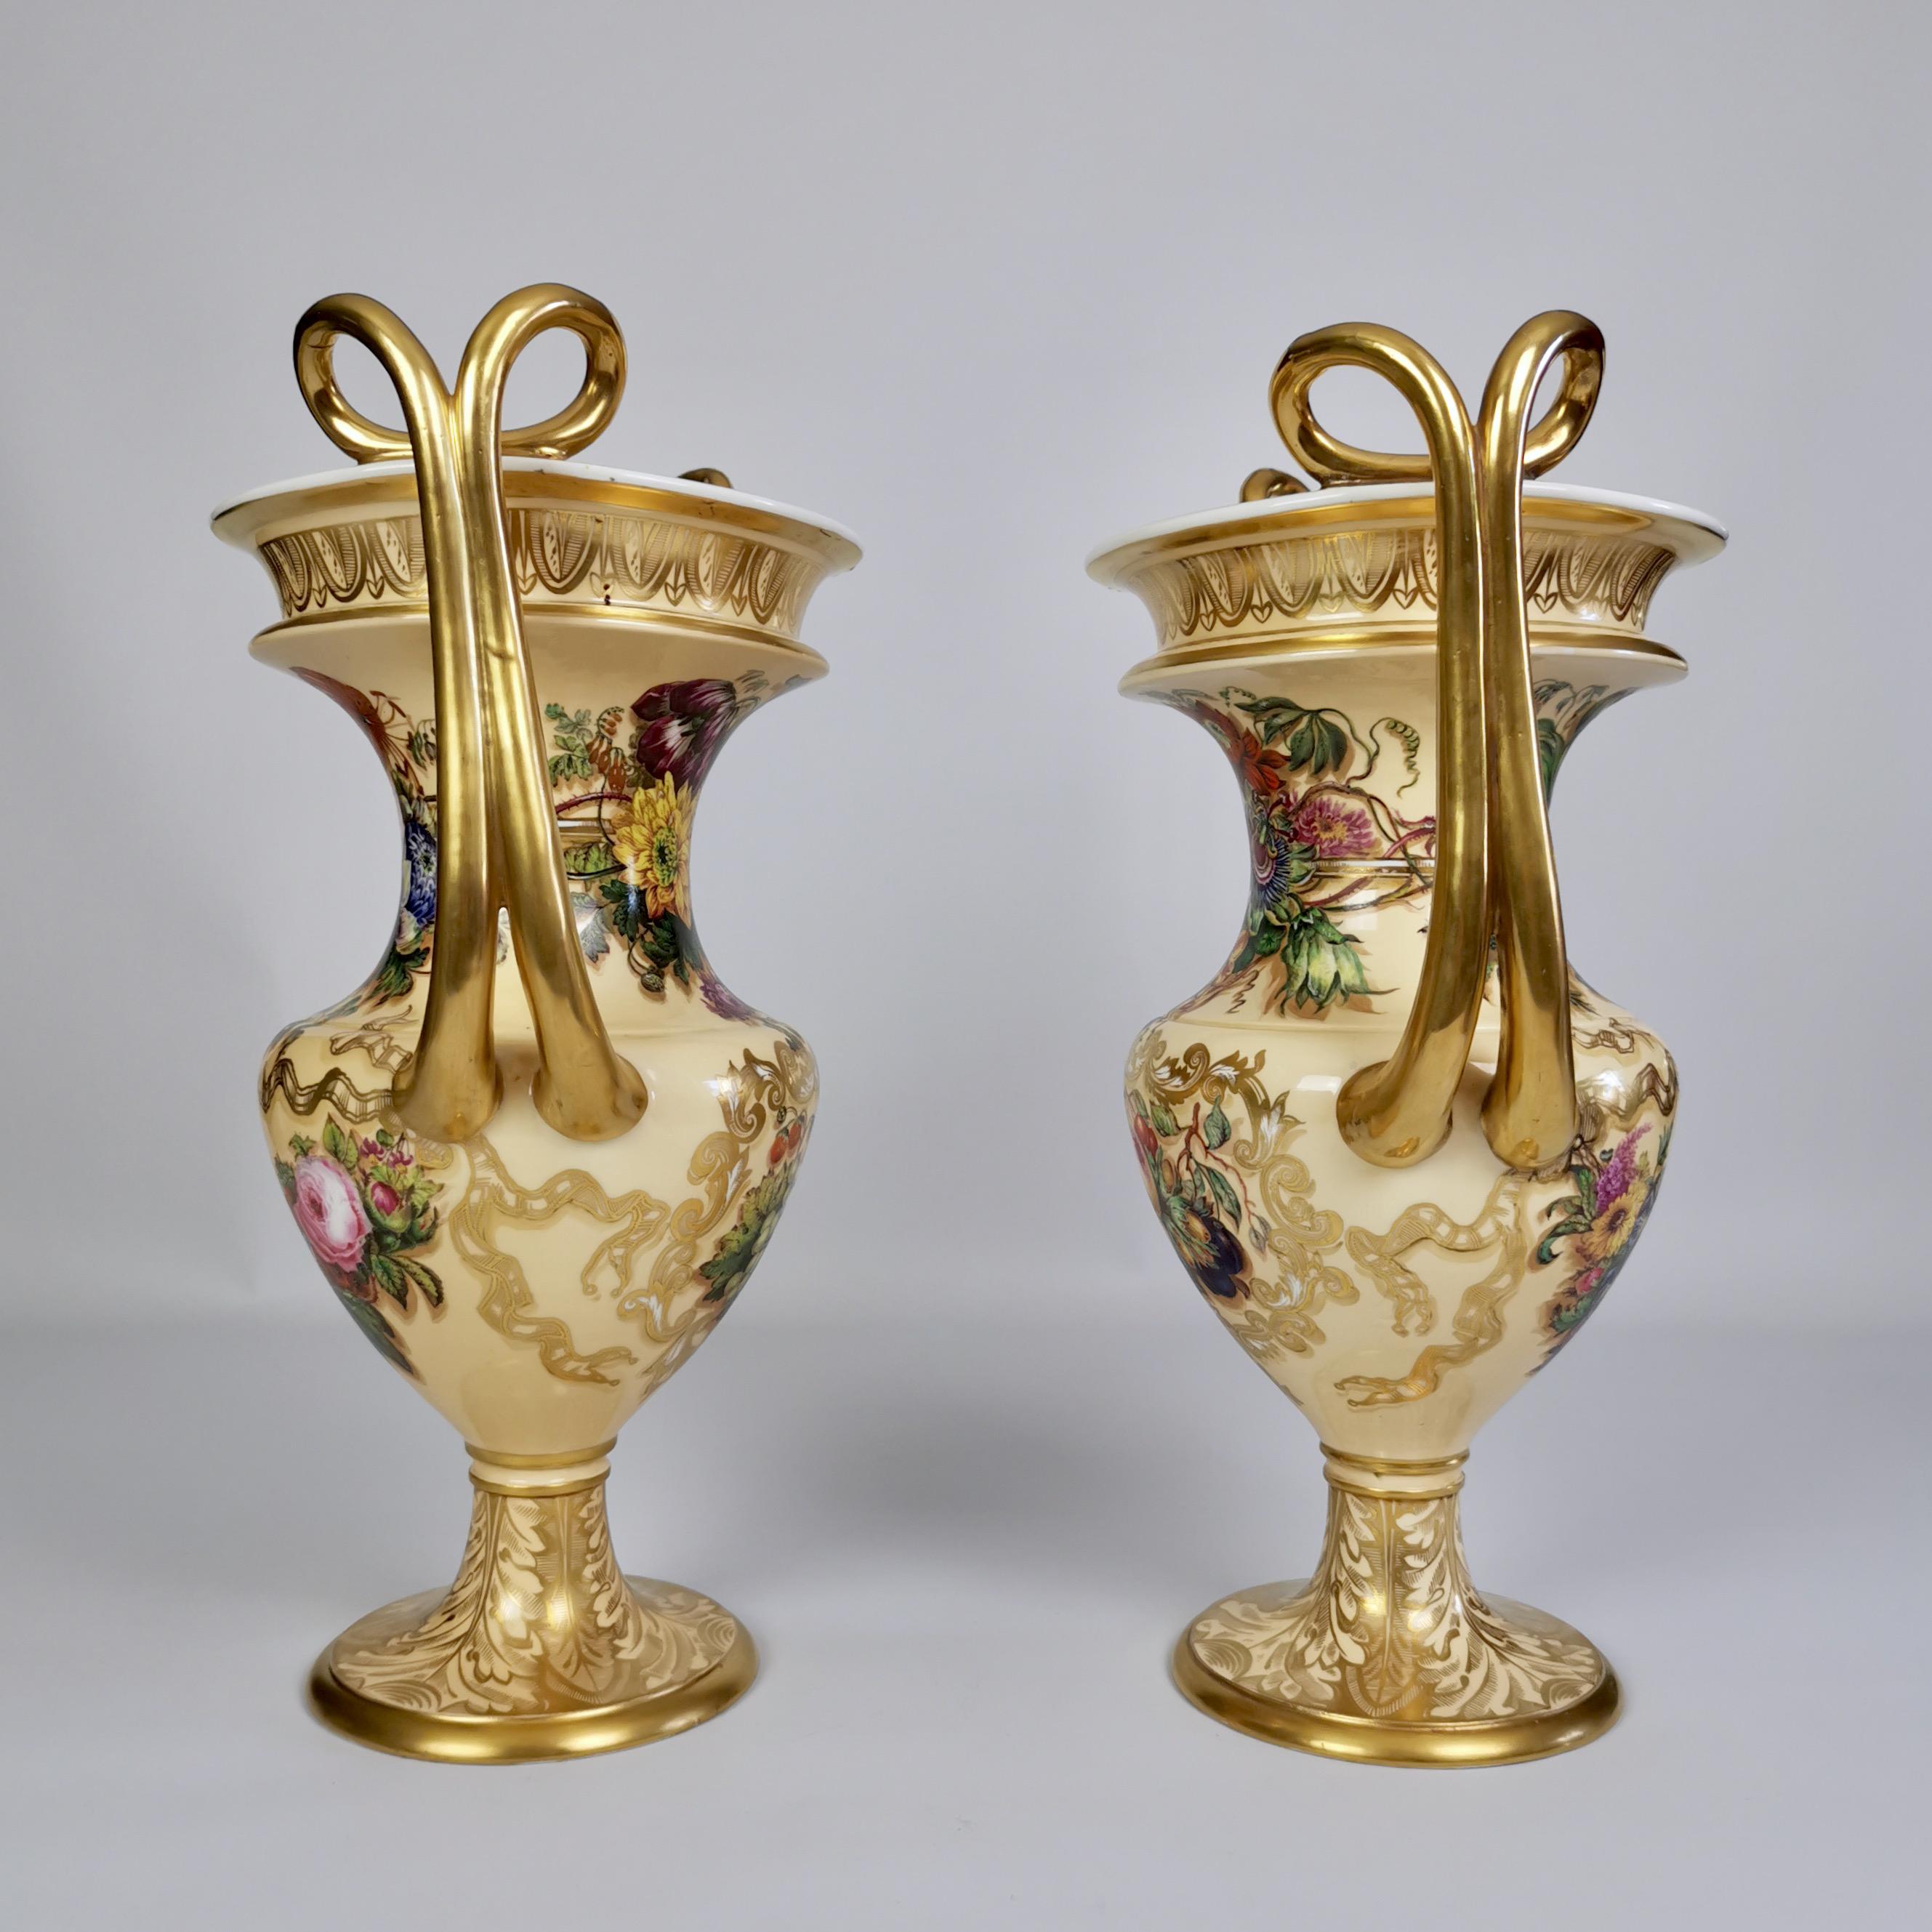 On offer is an extremely rare and sublimely crafted pair of vases made by Copeland & Garrett between 1833 and 1847, which was the Rococo Revival era. The vases have a soft yellow ground with lavish gilding and stunning paintings of flowers and